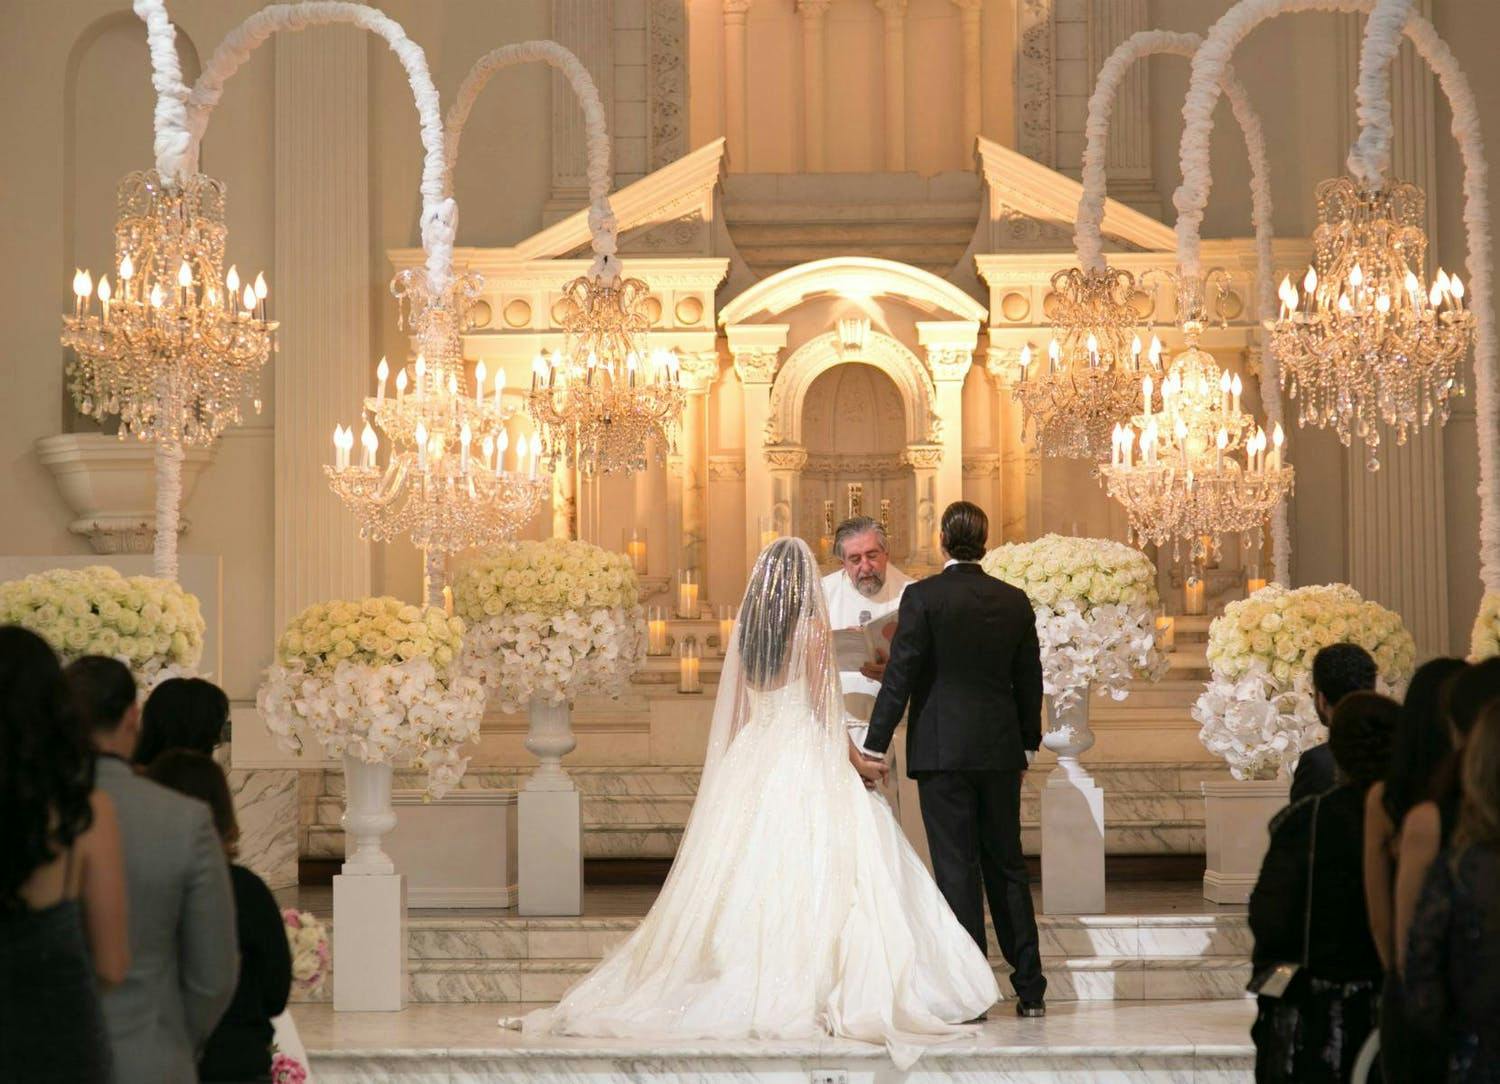 Bride and Groom Exchange Vows Before Officiant and Guests in All-White Ballroom With Chandeliers Suspended From White Curved Poles | PartySlate